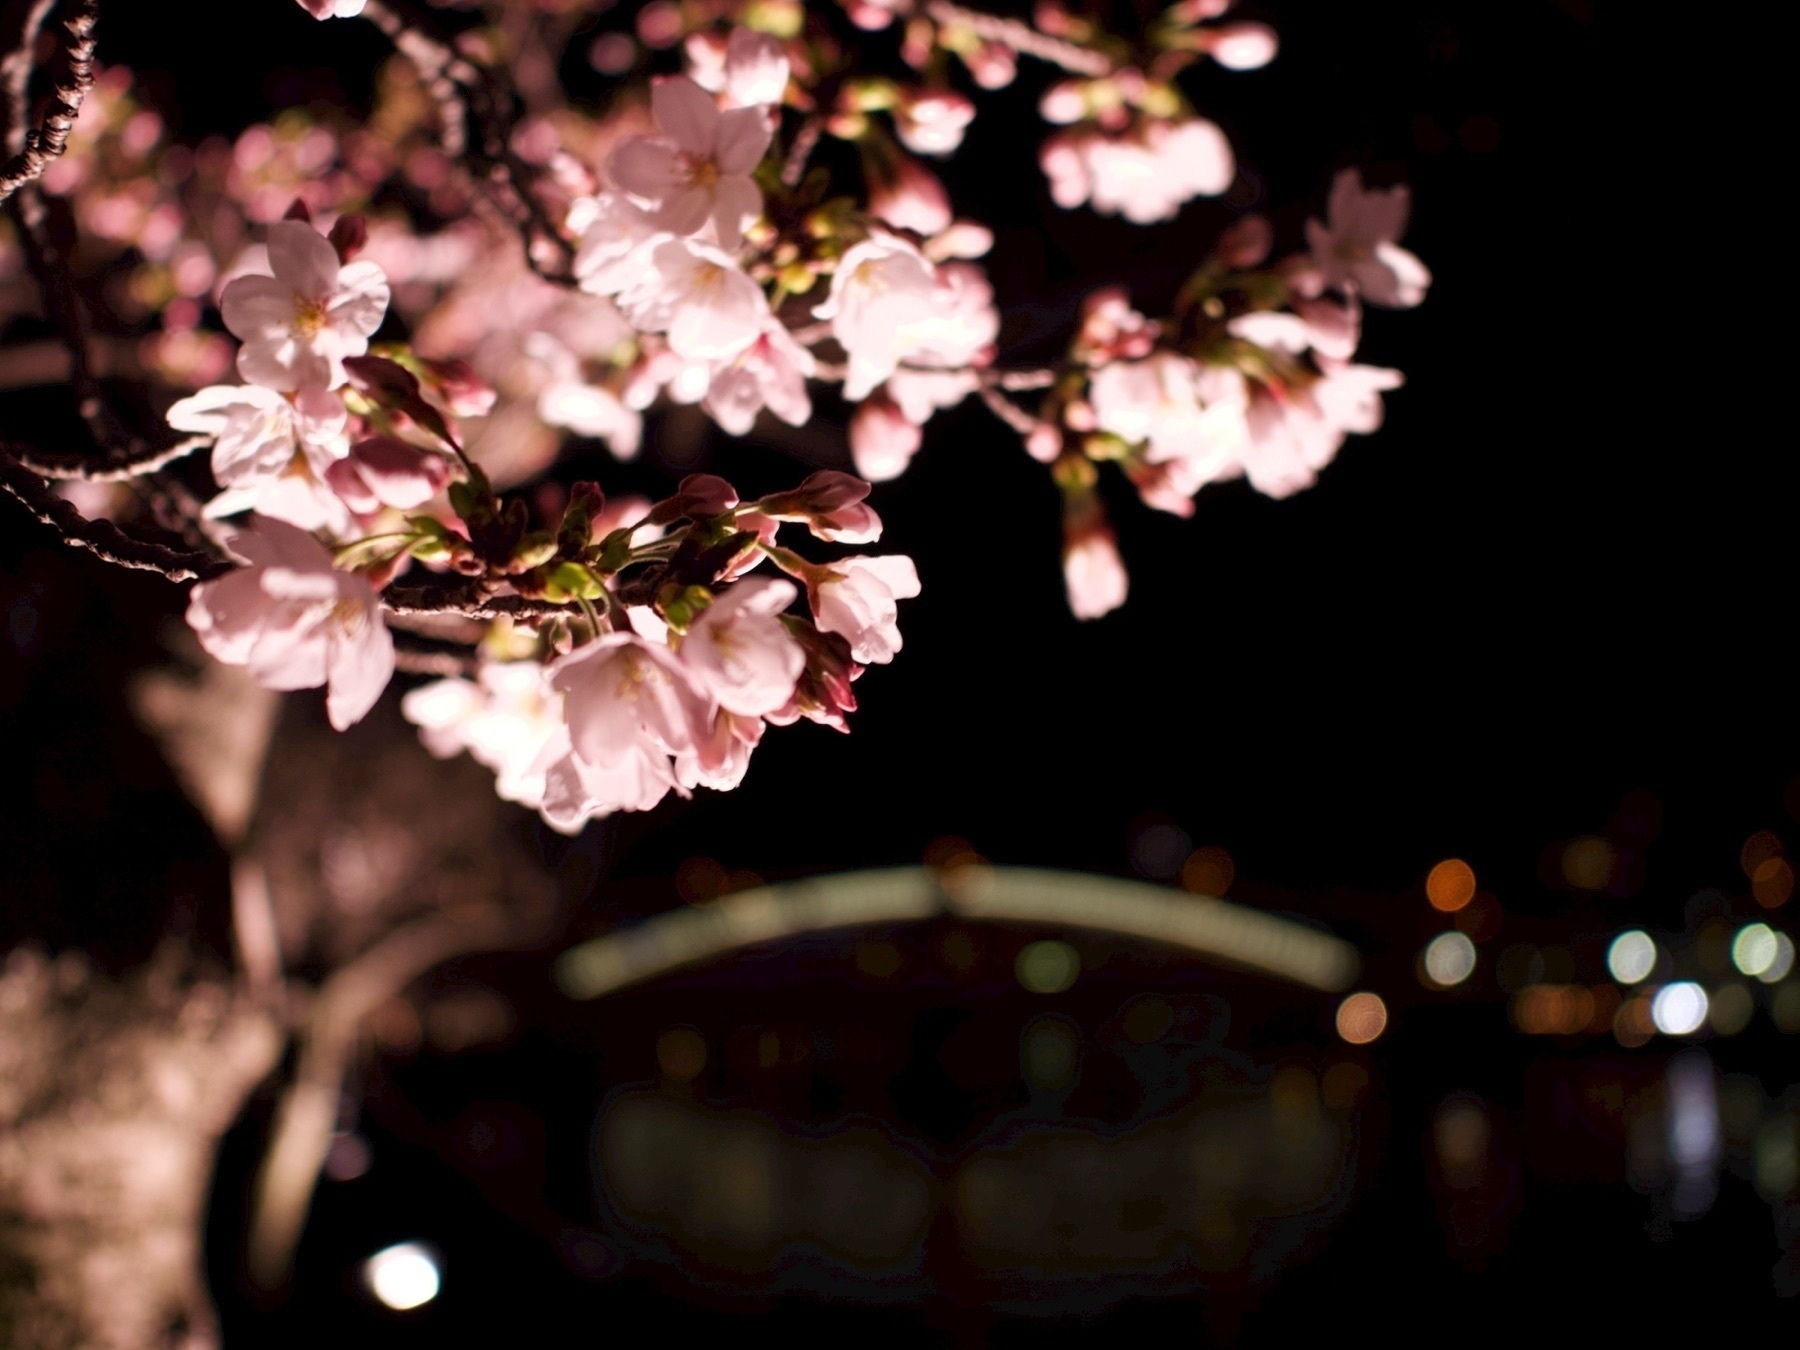 close up of lit up cherry blossoms. In the distance is the lit up arch of a bridge out of focus